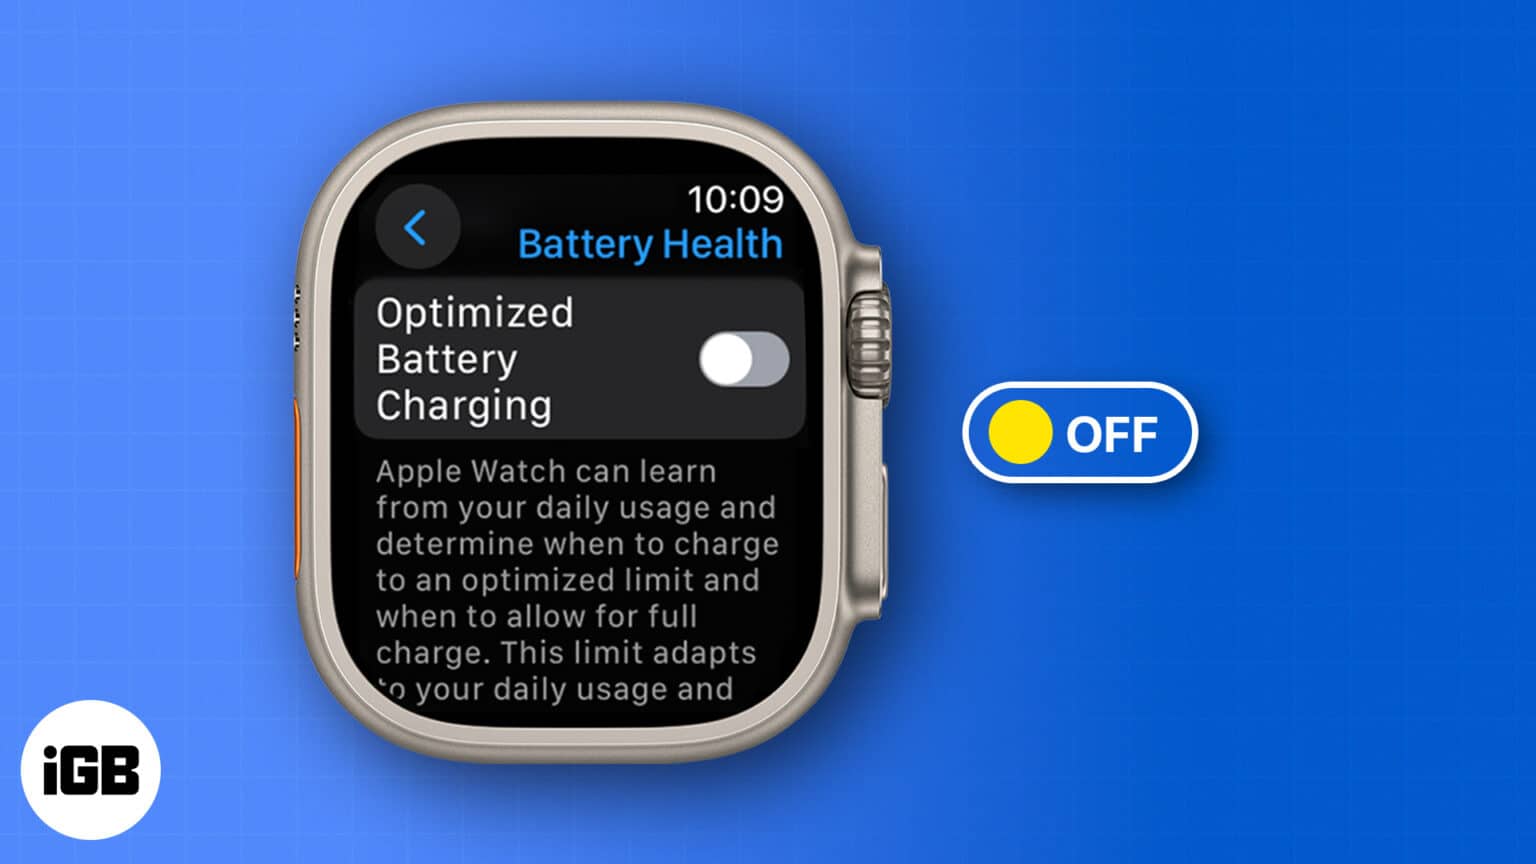 How to turn off Optimized Battery Charging on Apple Watch